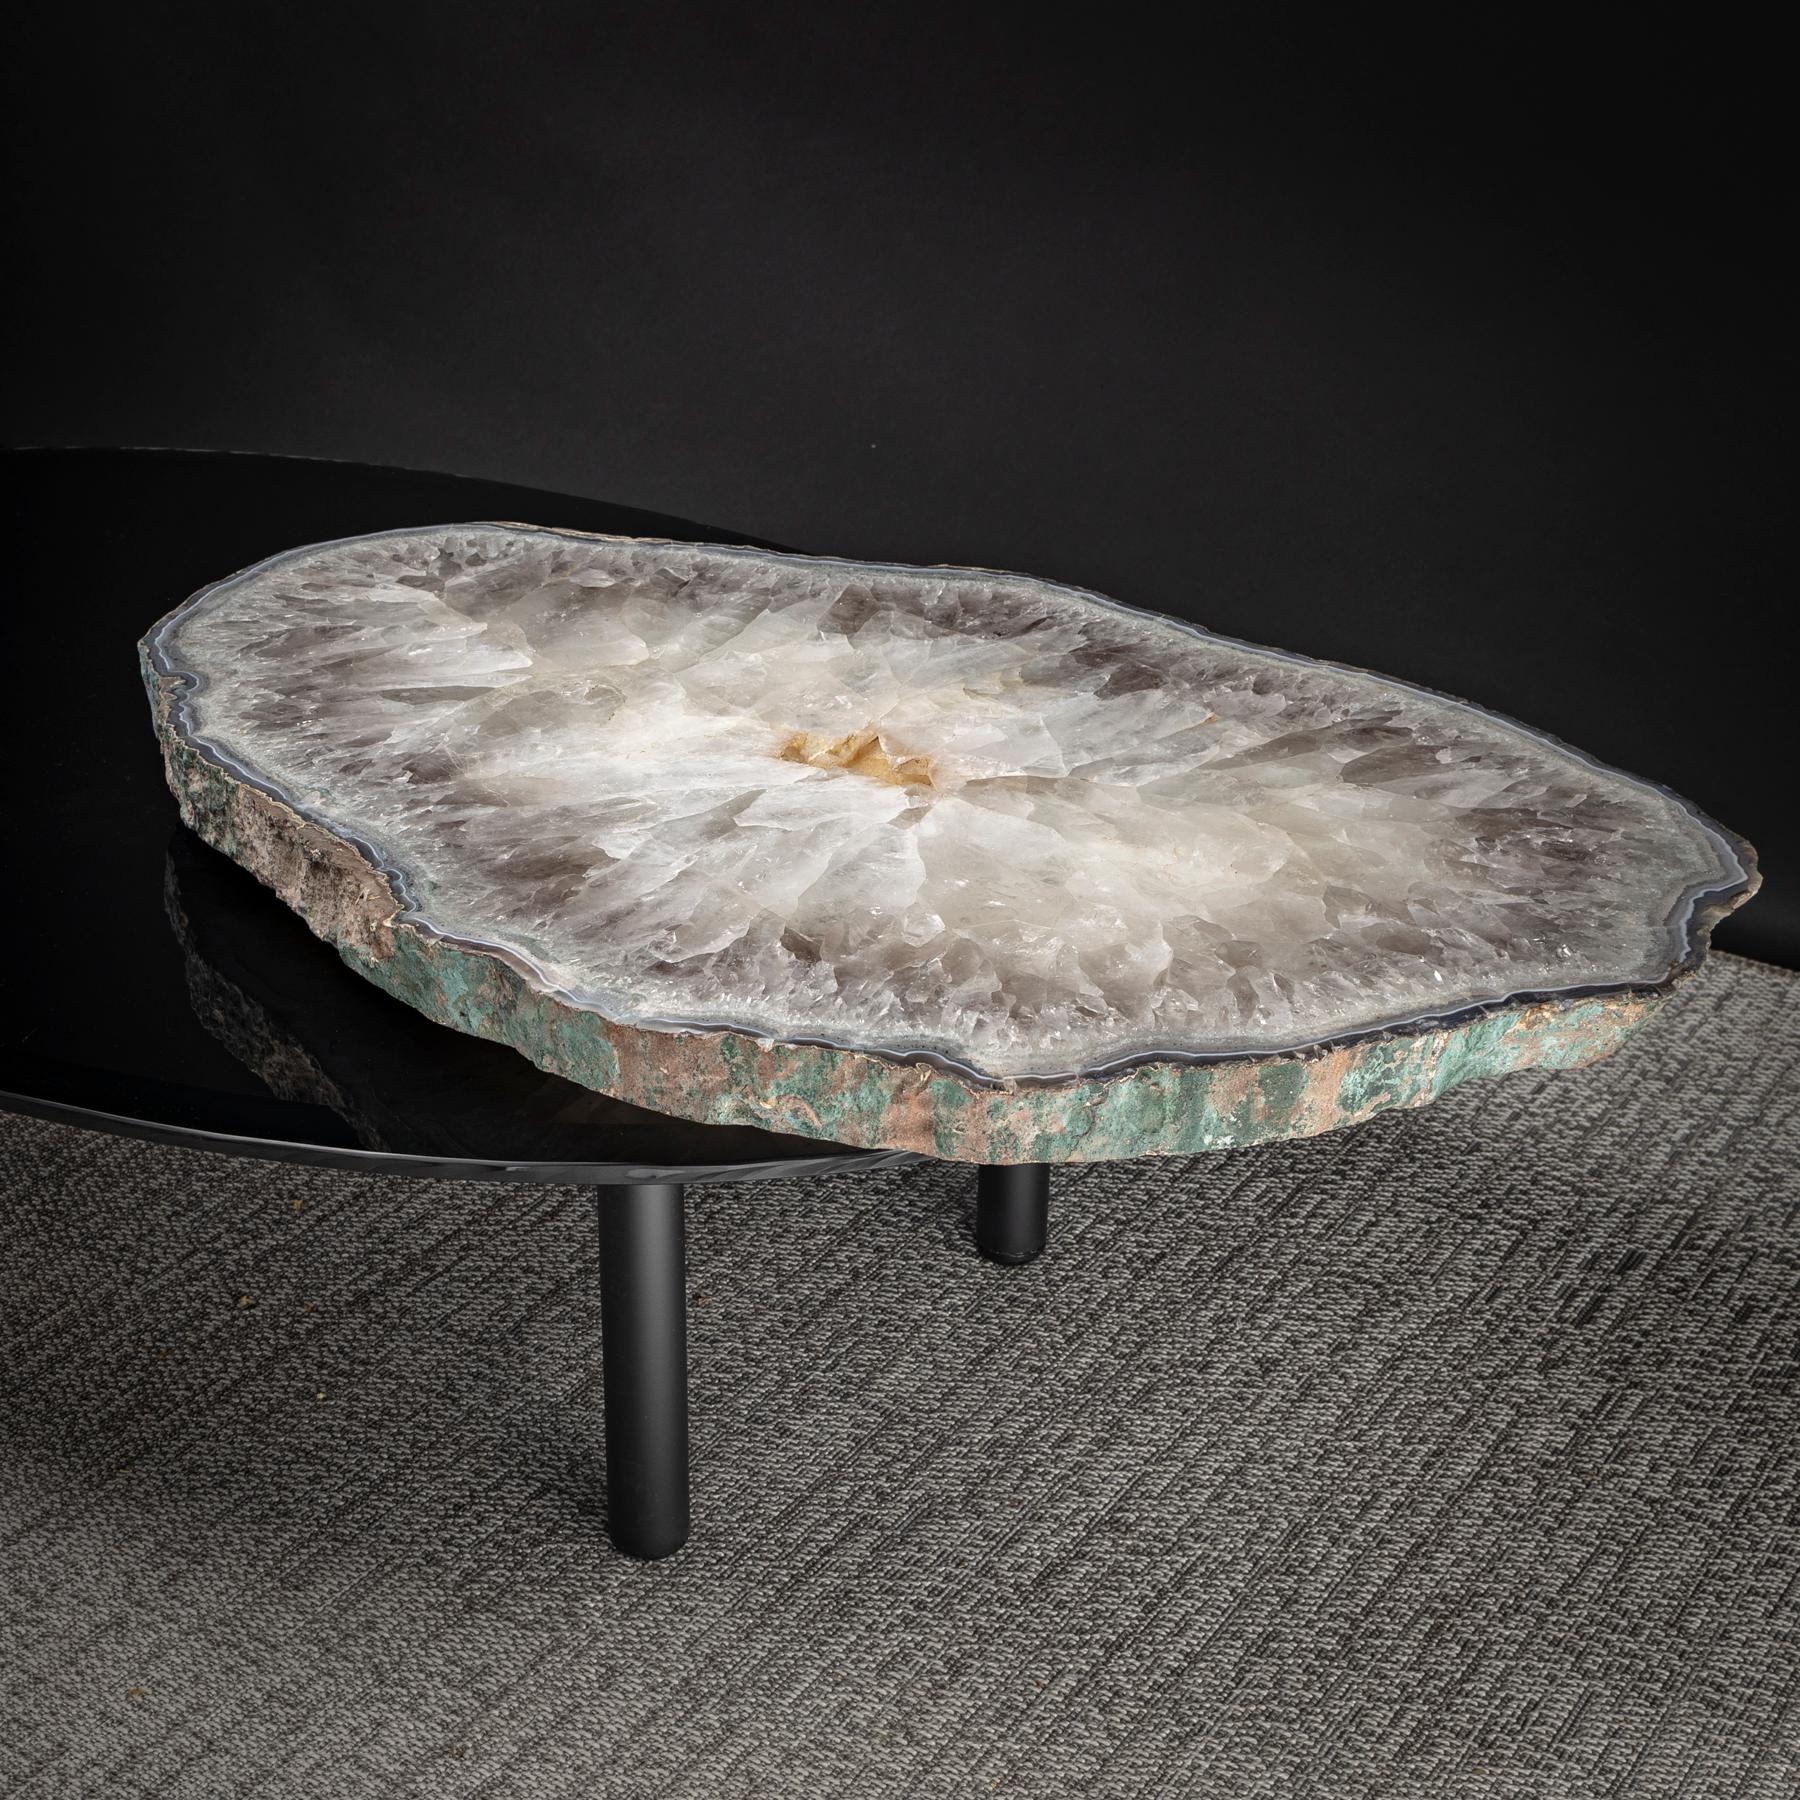 Center Table, with Rotating Brazilian Agate on Black Tempered Glass 3